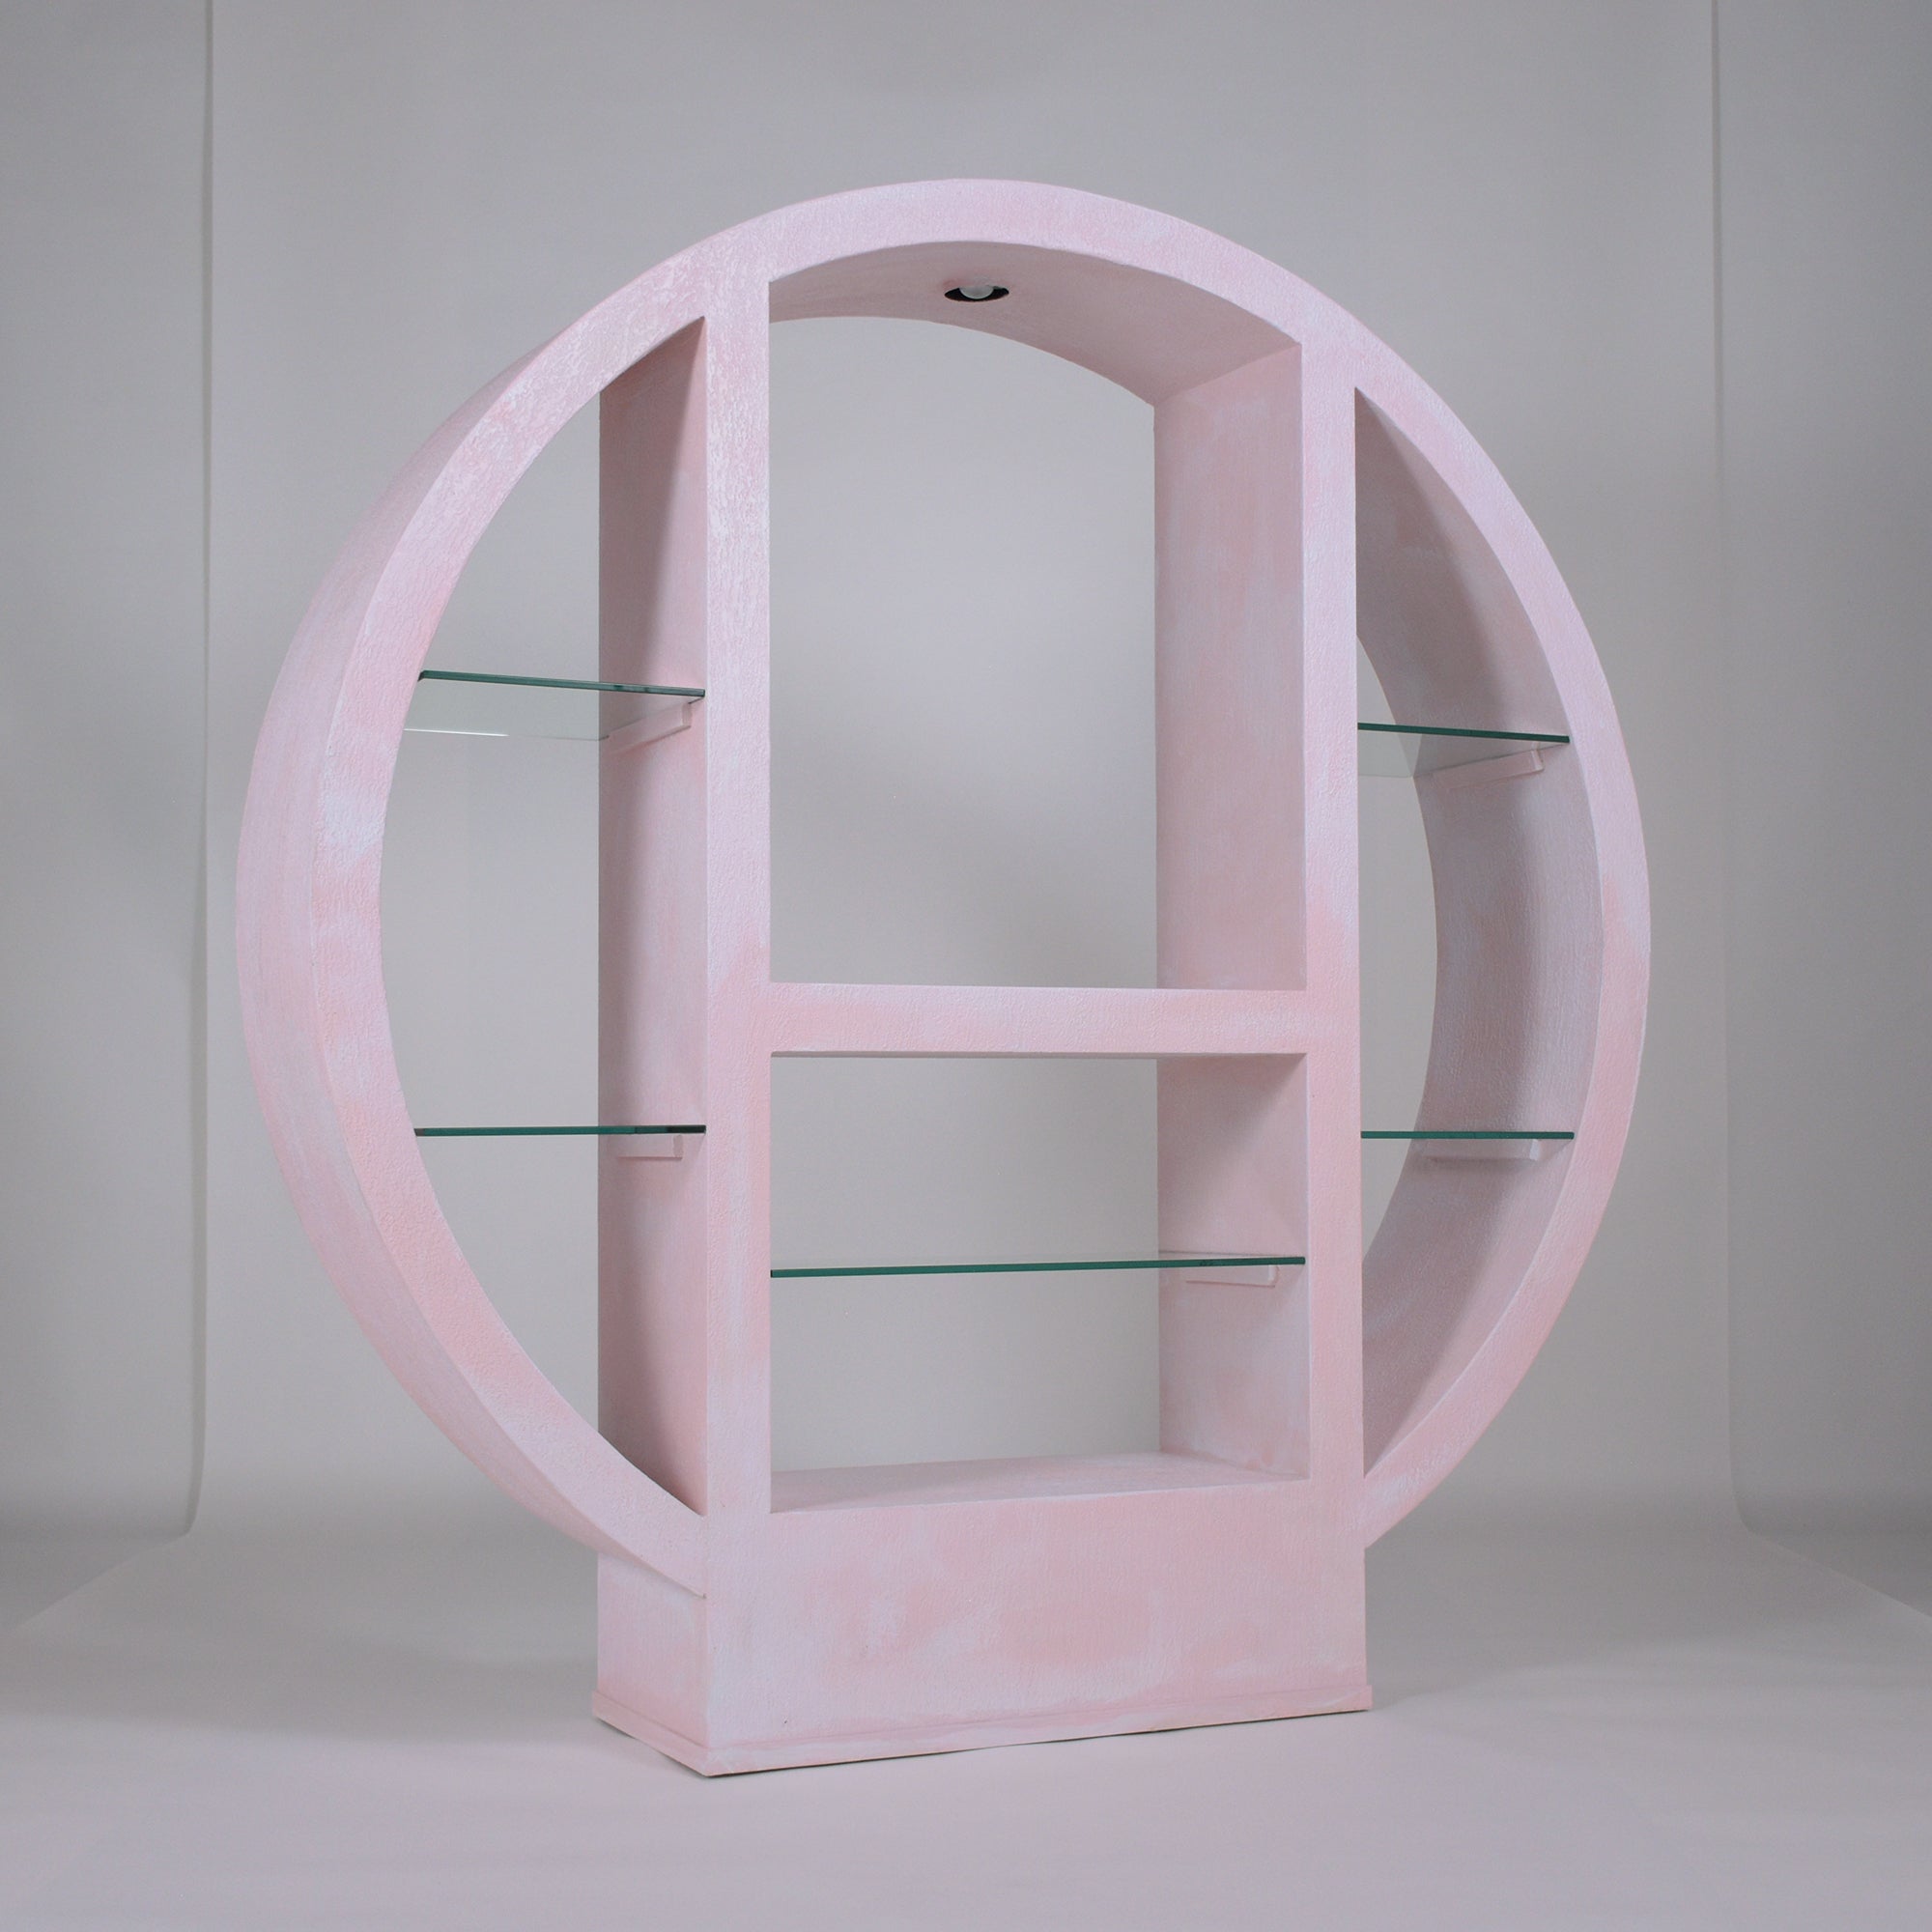 An extraordinary mid-century shelf unit crafted out of a wood & gesso combination and has been professionally restored by our team of craftsmen. This large circular open bookshelf frame offers a distinctive look, features five clear glass shelves,